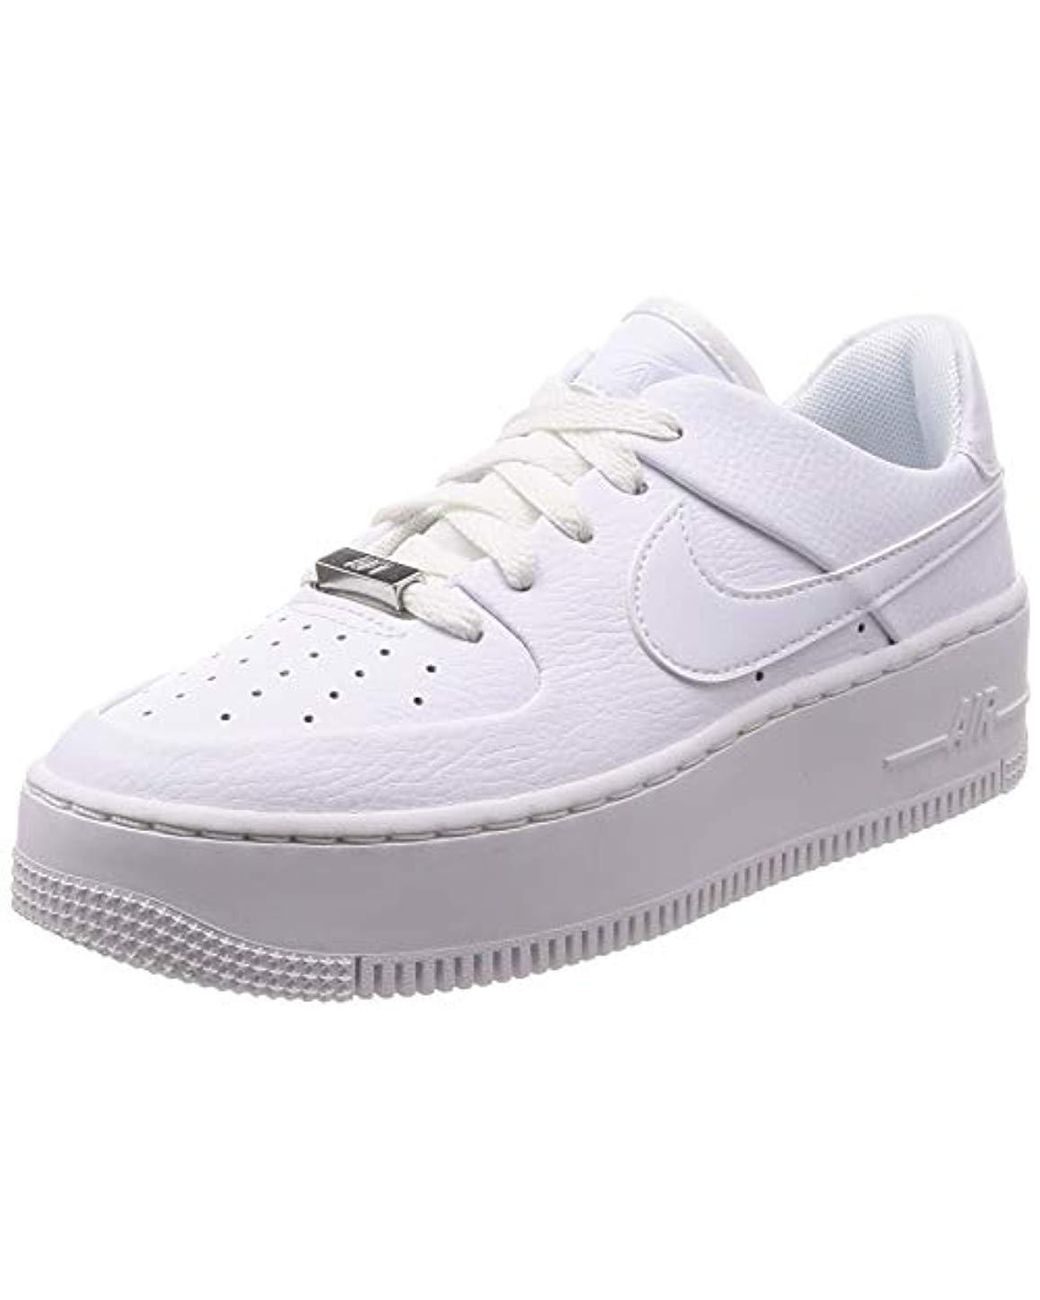 Nike Air Force 1 Sage Low Ar5339-100 Top Sneakers in White | Lyst UK